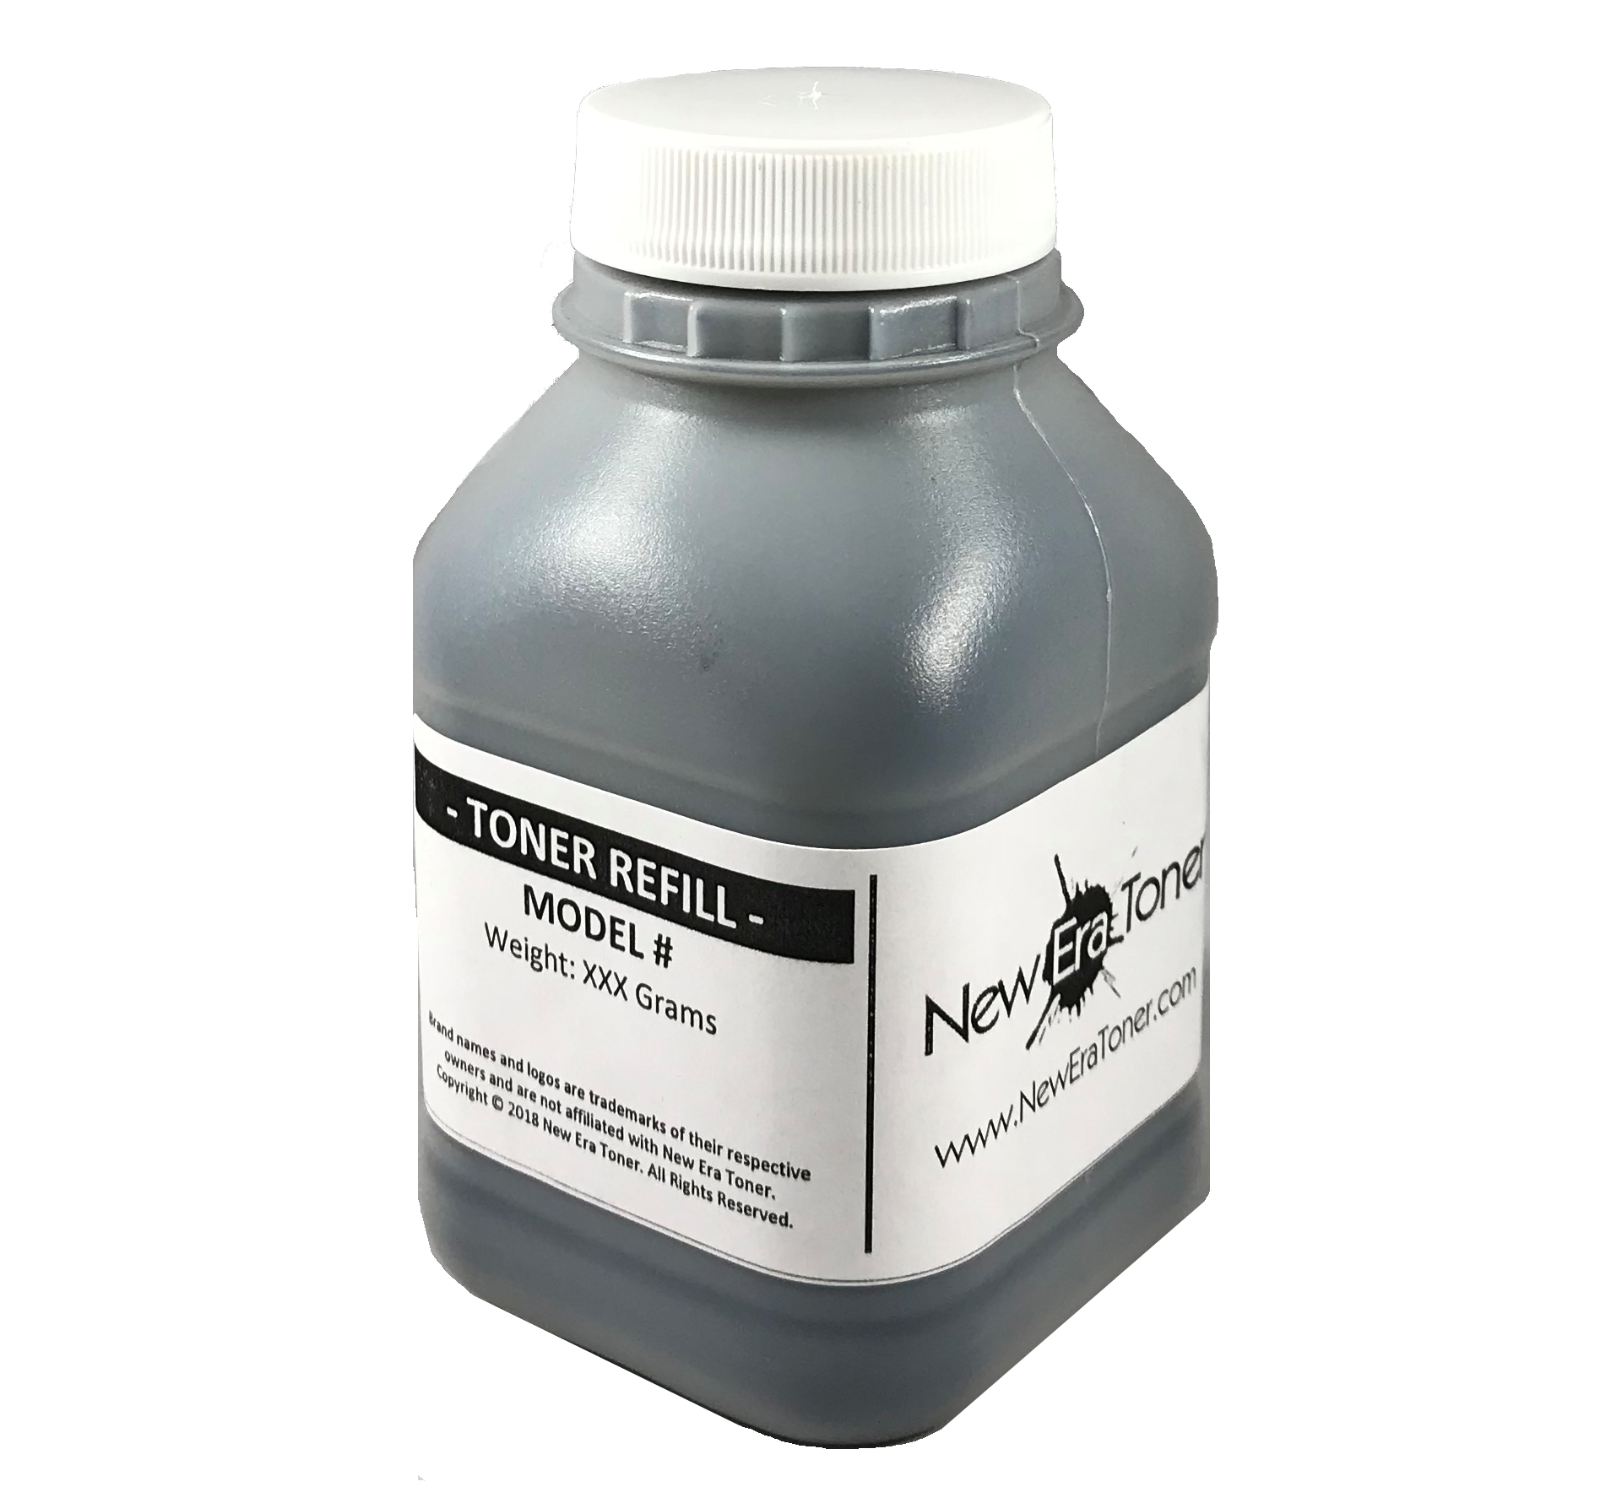 Compatible Refill for use in Brother TN-350 – New Era Toner